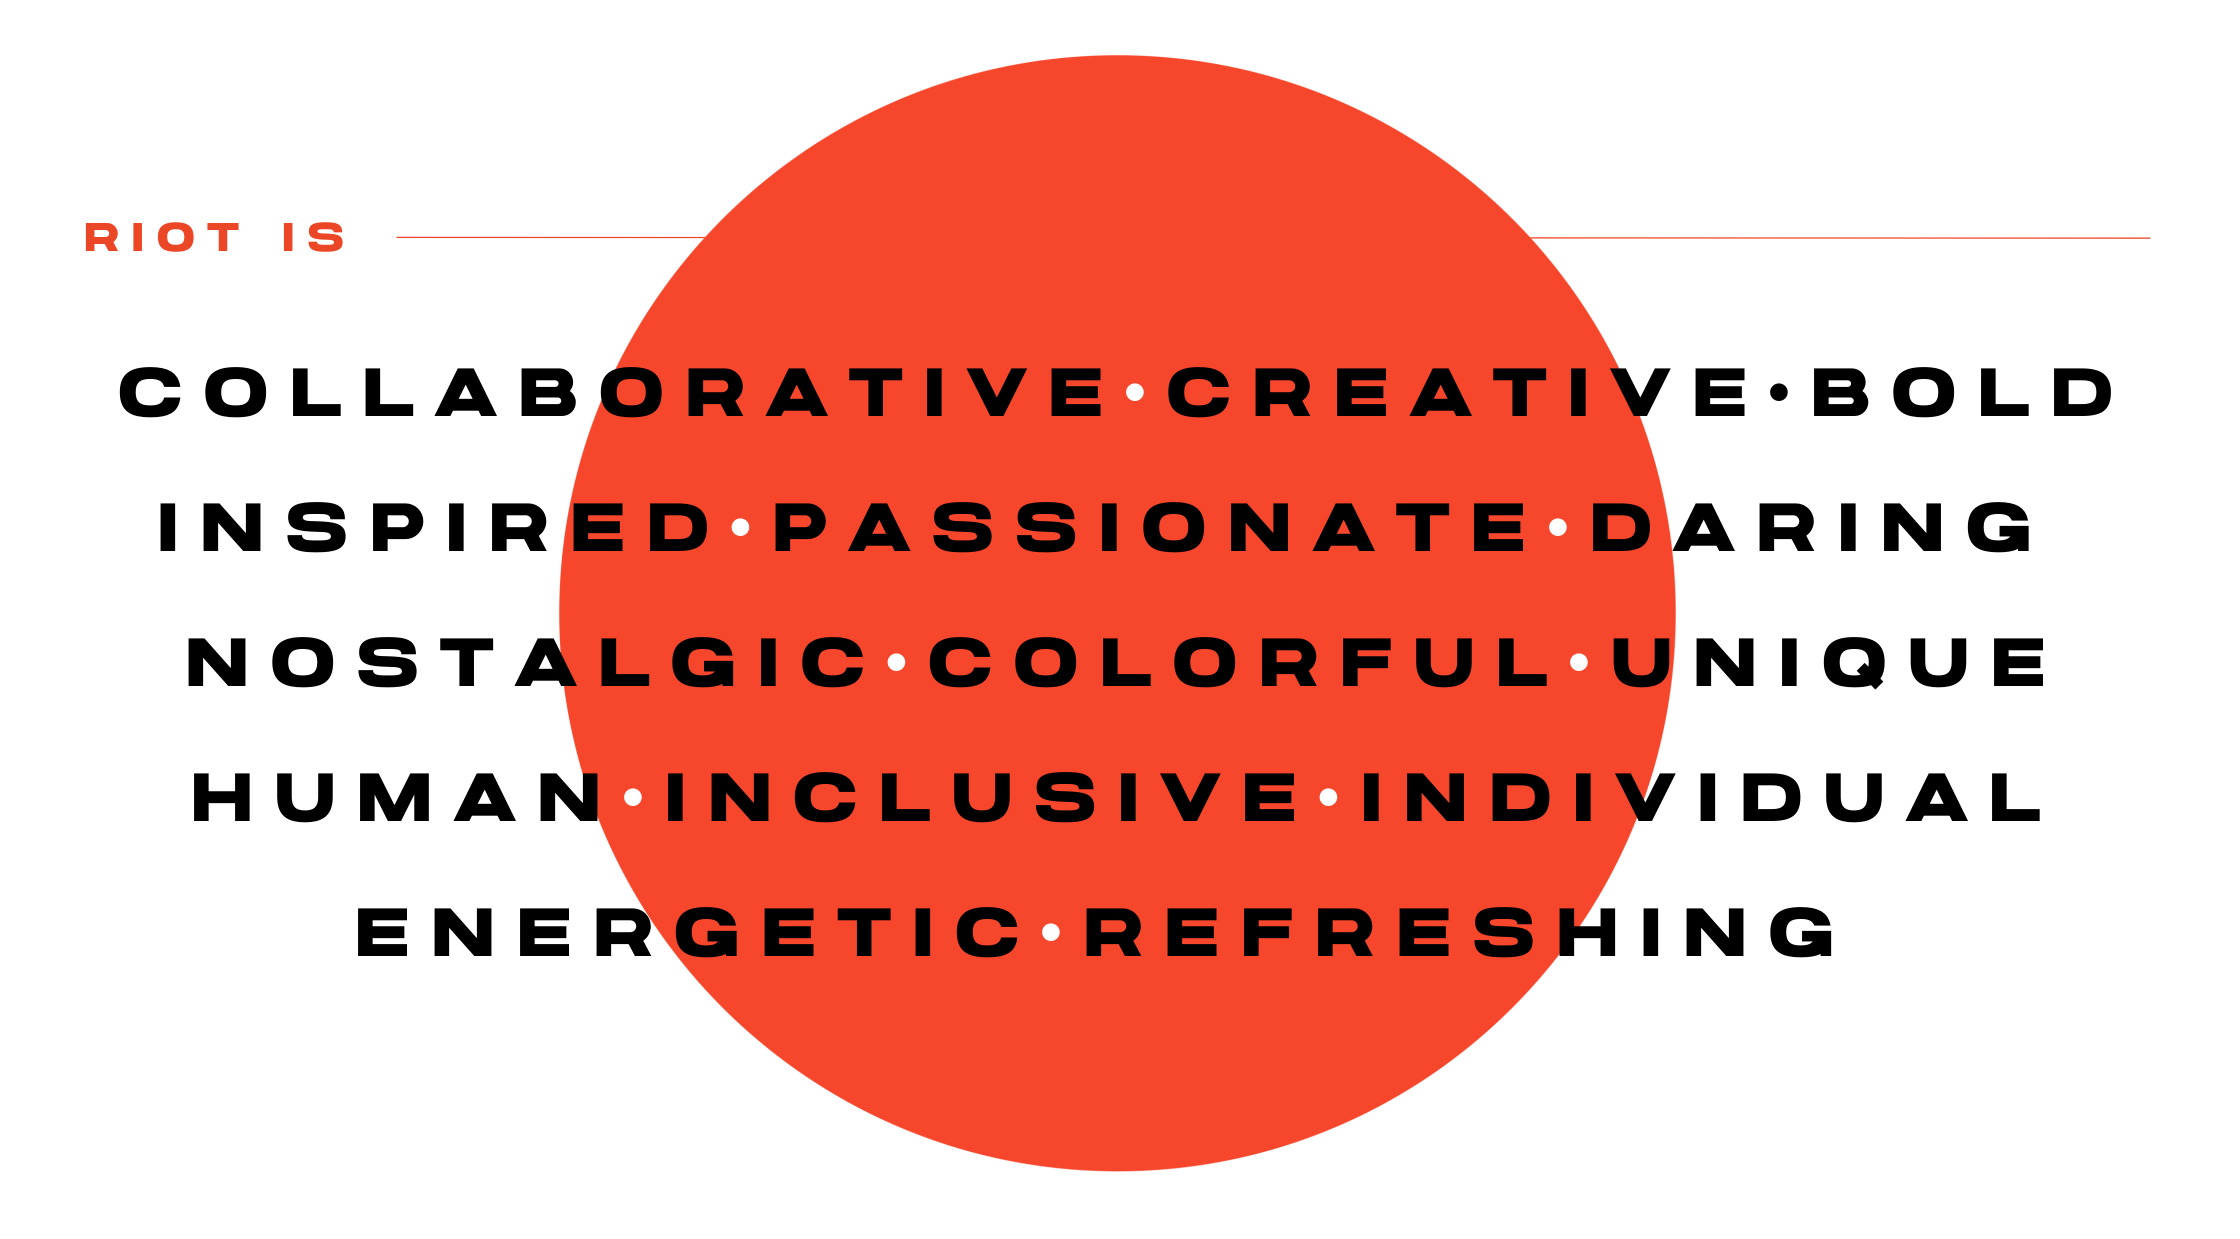 Our Creative Agency is collaborative, creative, bold, inspired, passionate, daring, nostalgic, colorful, unique, human, inclusive, individual, energetic and refreshing.